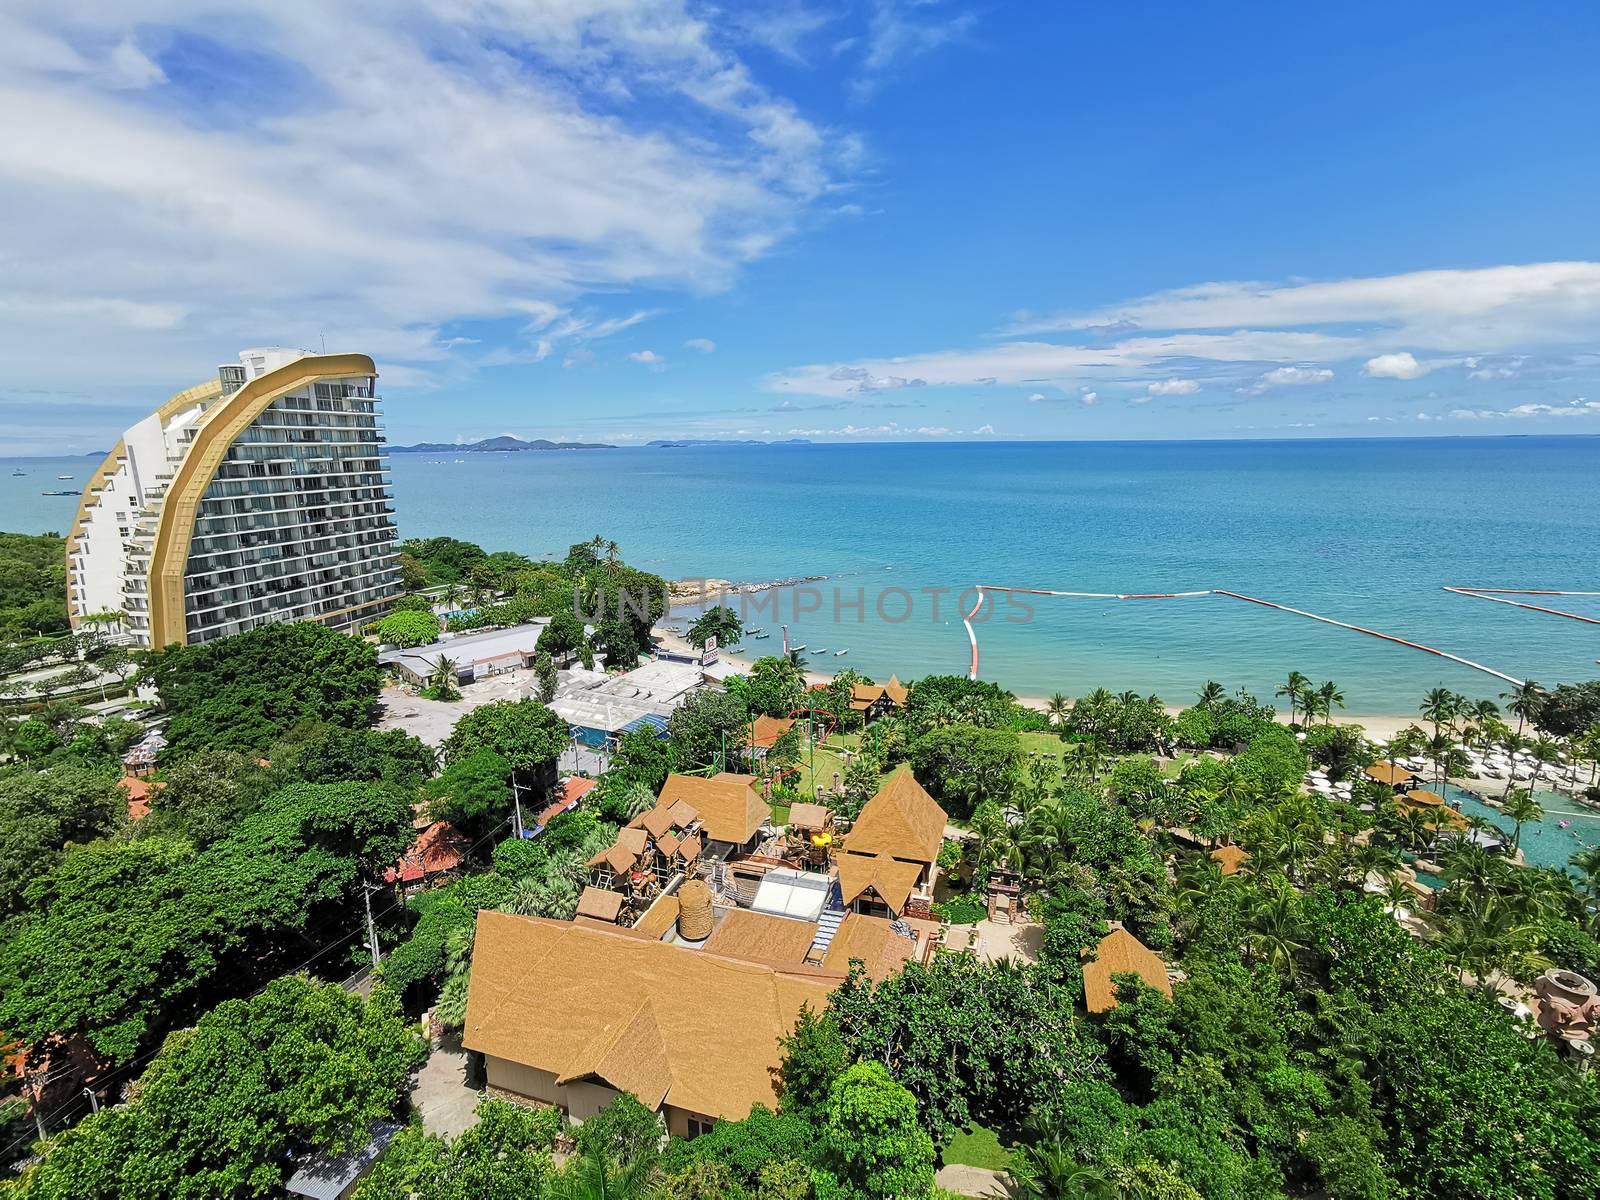 The landscape of beach and Sea view for vacation and summer from high hotel view with blue sky in the morning.